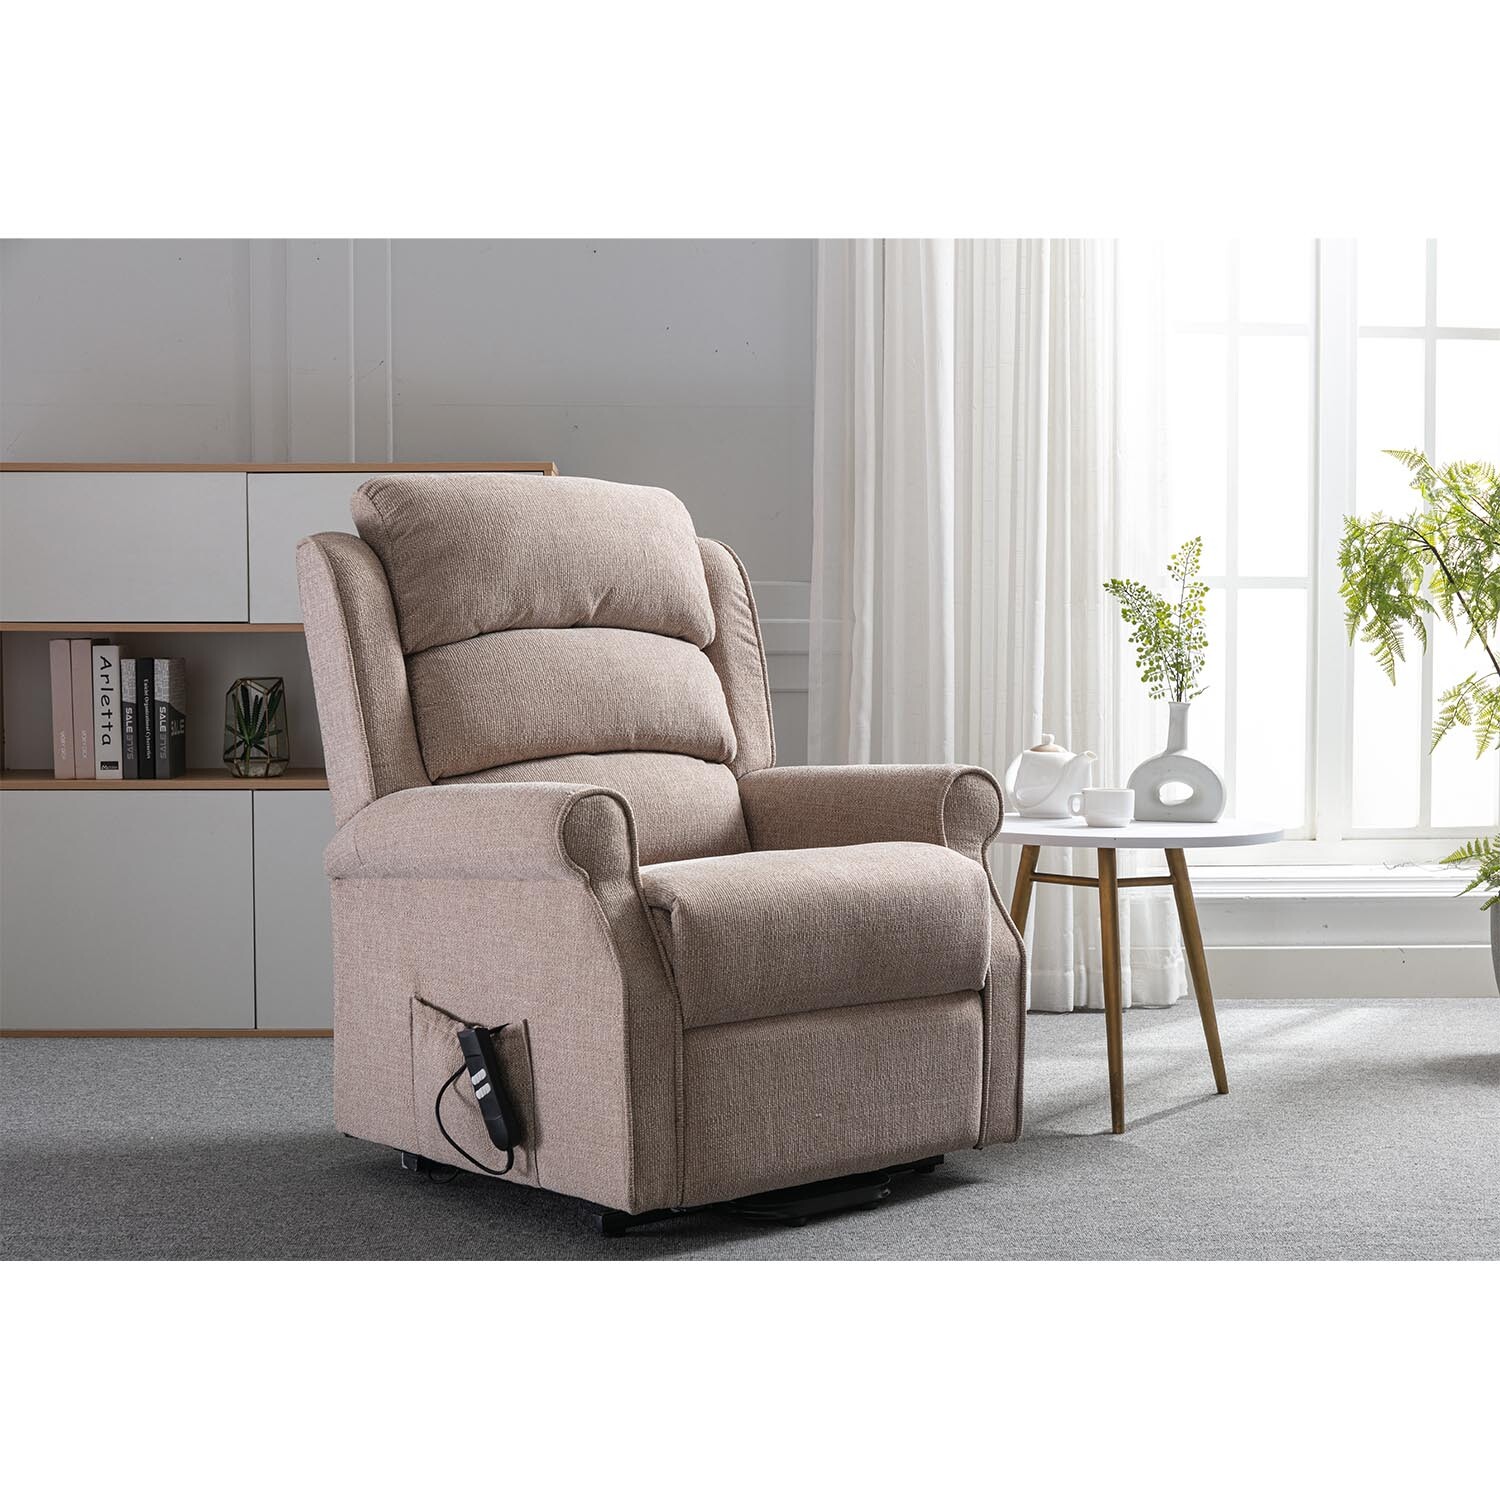 Winslow Neutral Wheat Fabric Rise Recliner Chair Image 3